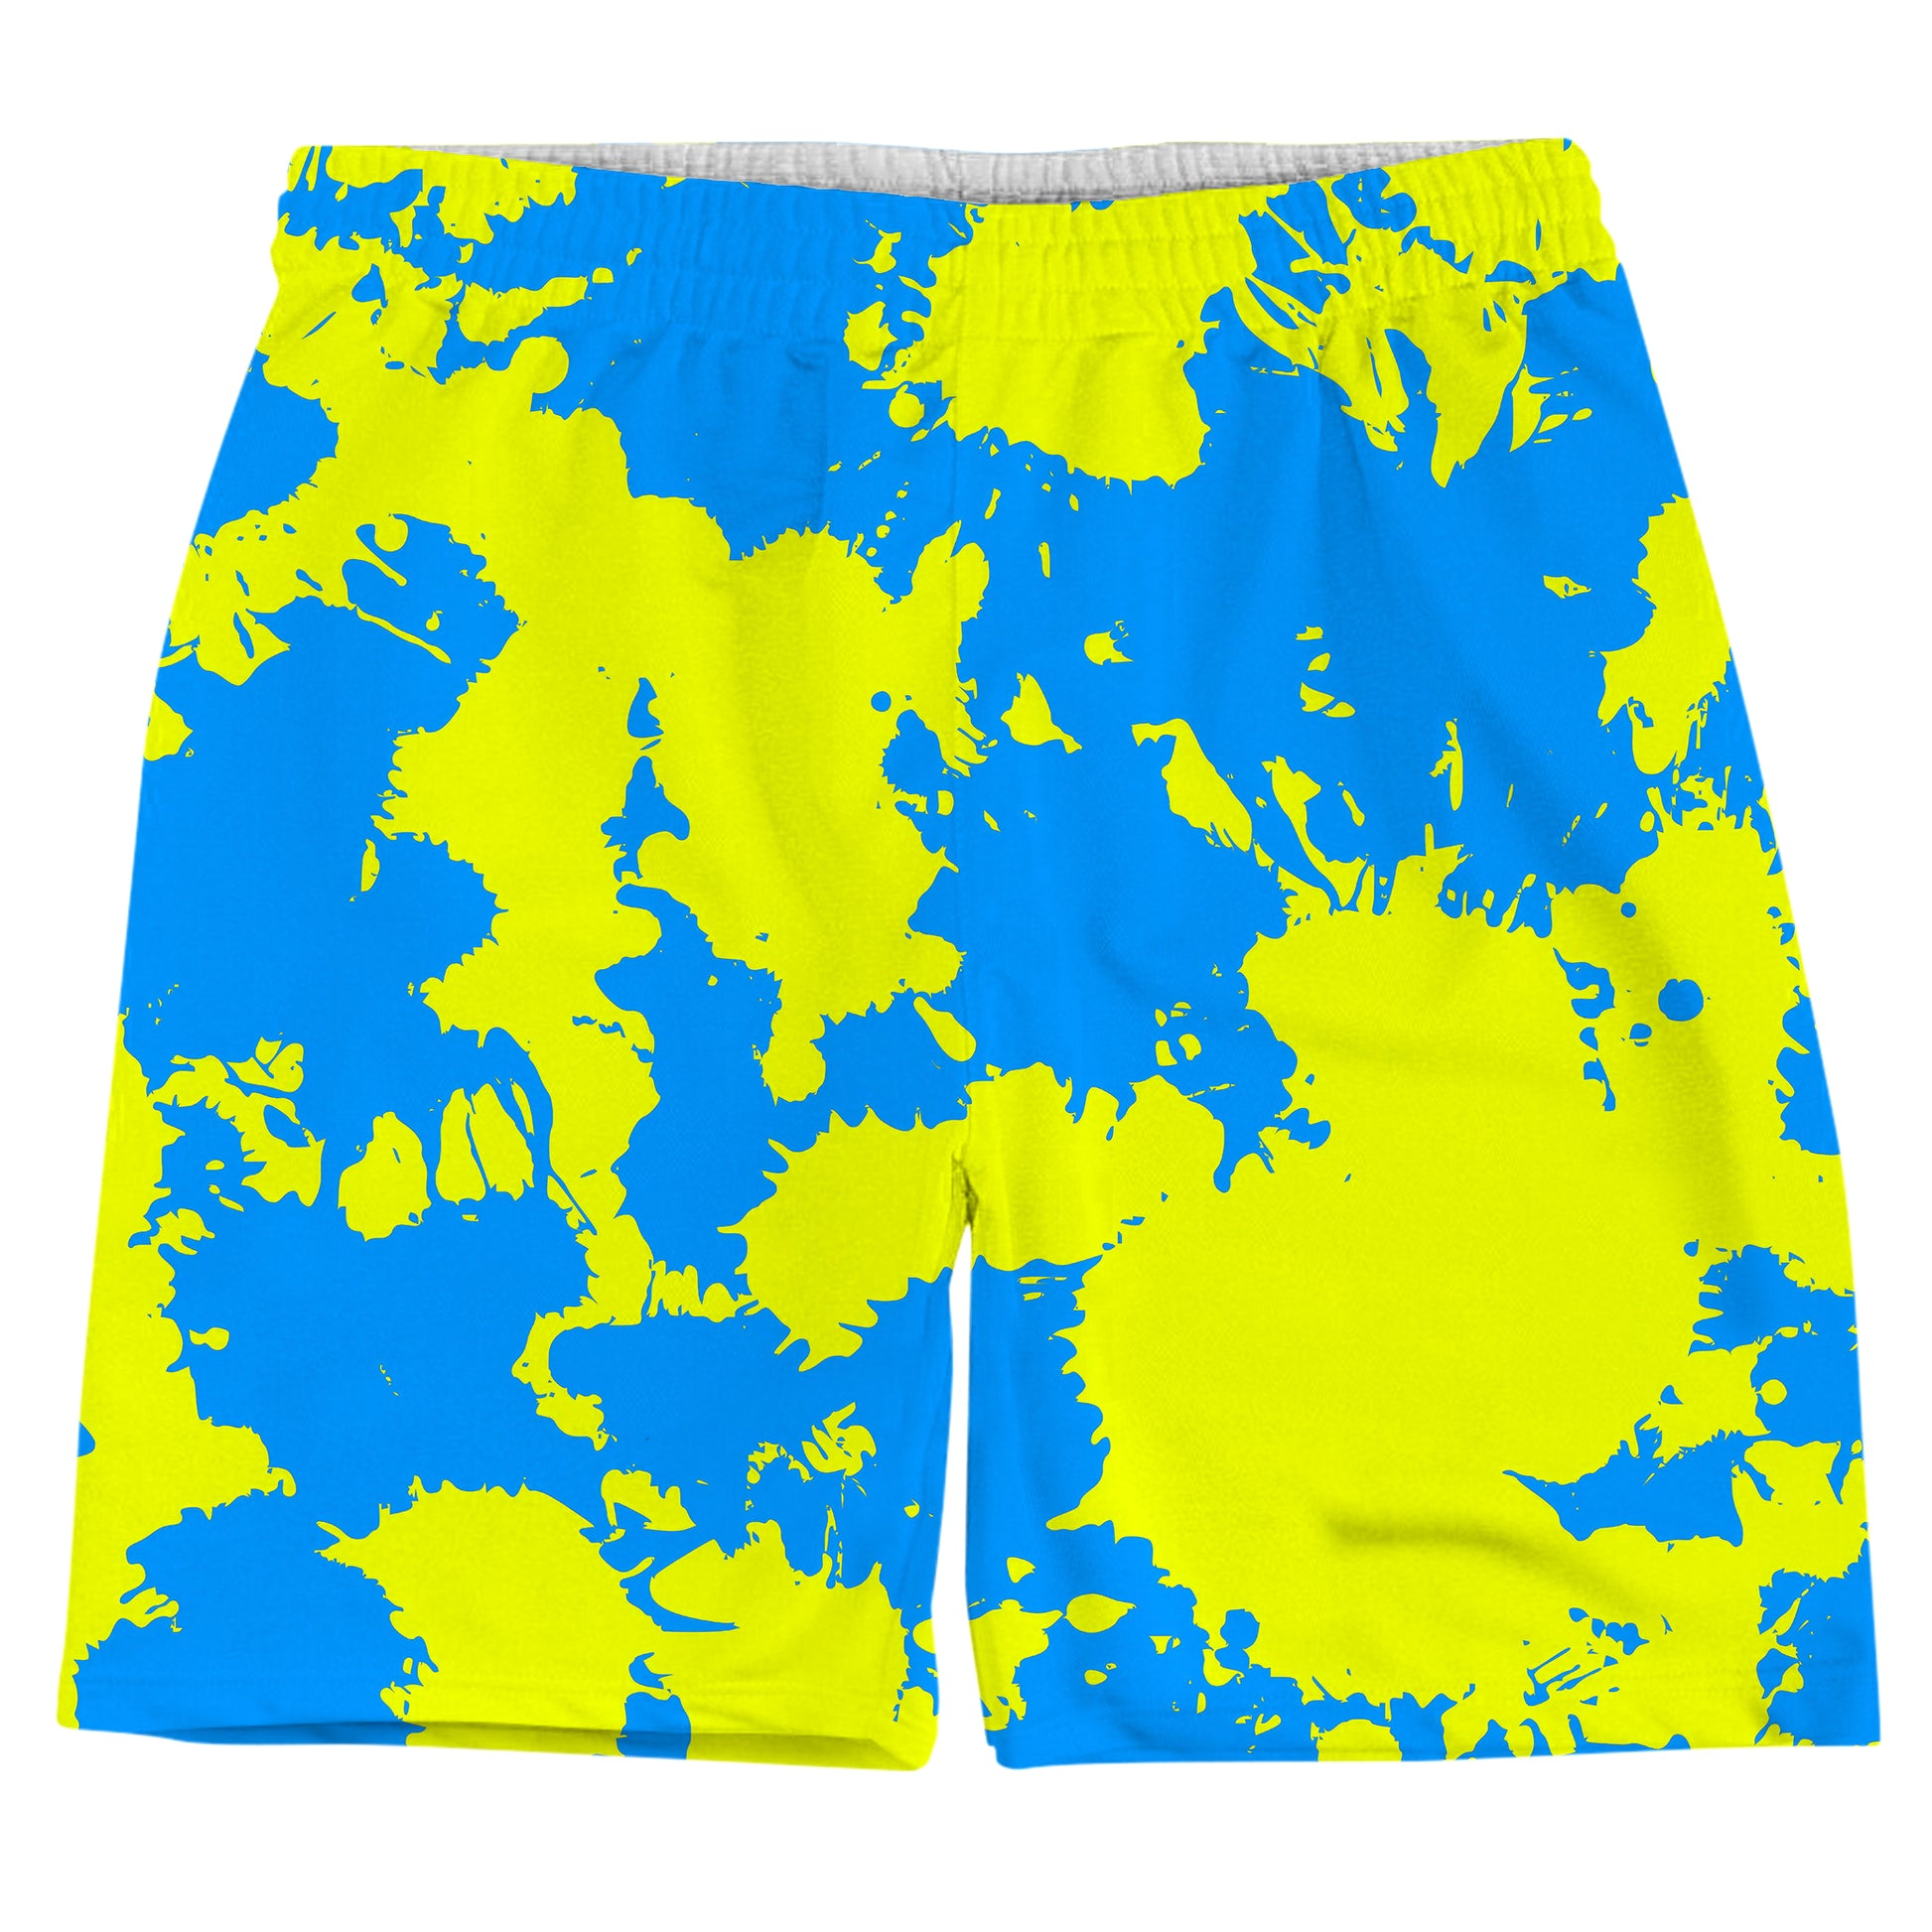 Yellow and Blue Paint Splatter T-Shirt and Shorts with Bucket Hat Combo, Big Tex Funkadelic, | iEDM